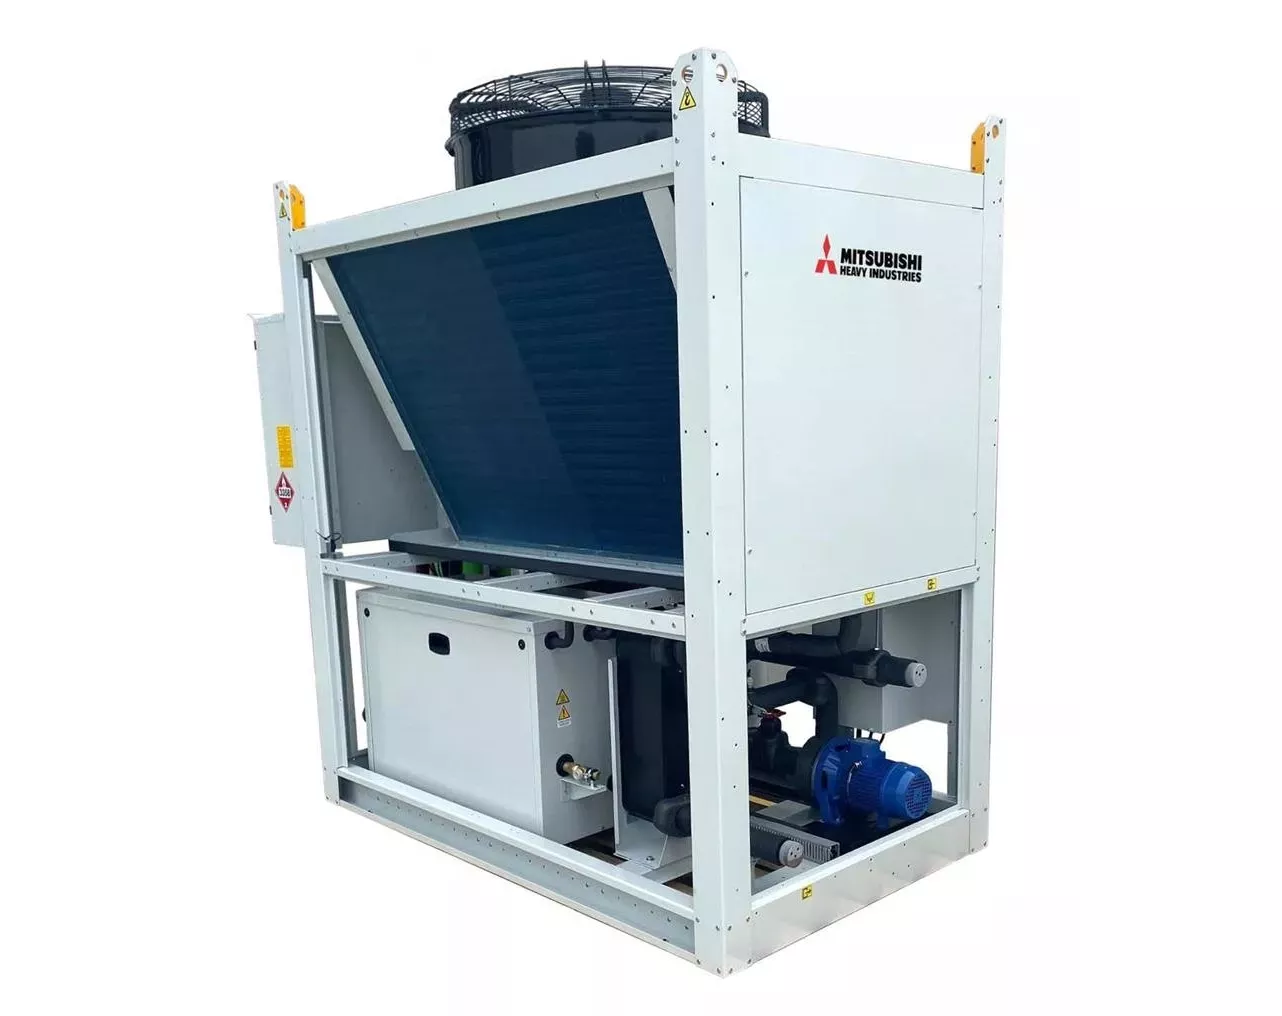 MHI Thermal Systems to Add Hydrolution PRO Series of Air-cooled Heat Pump Chillers